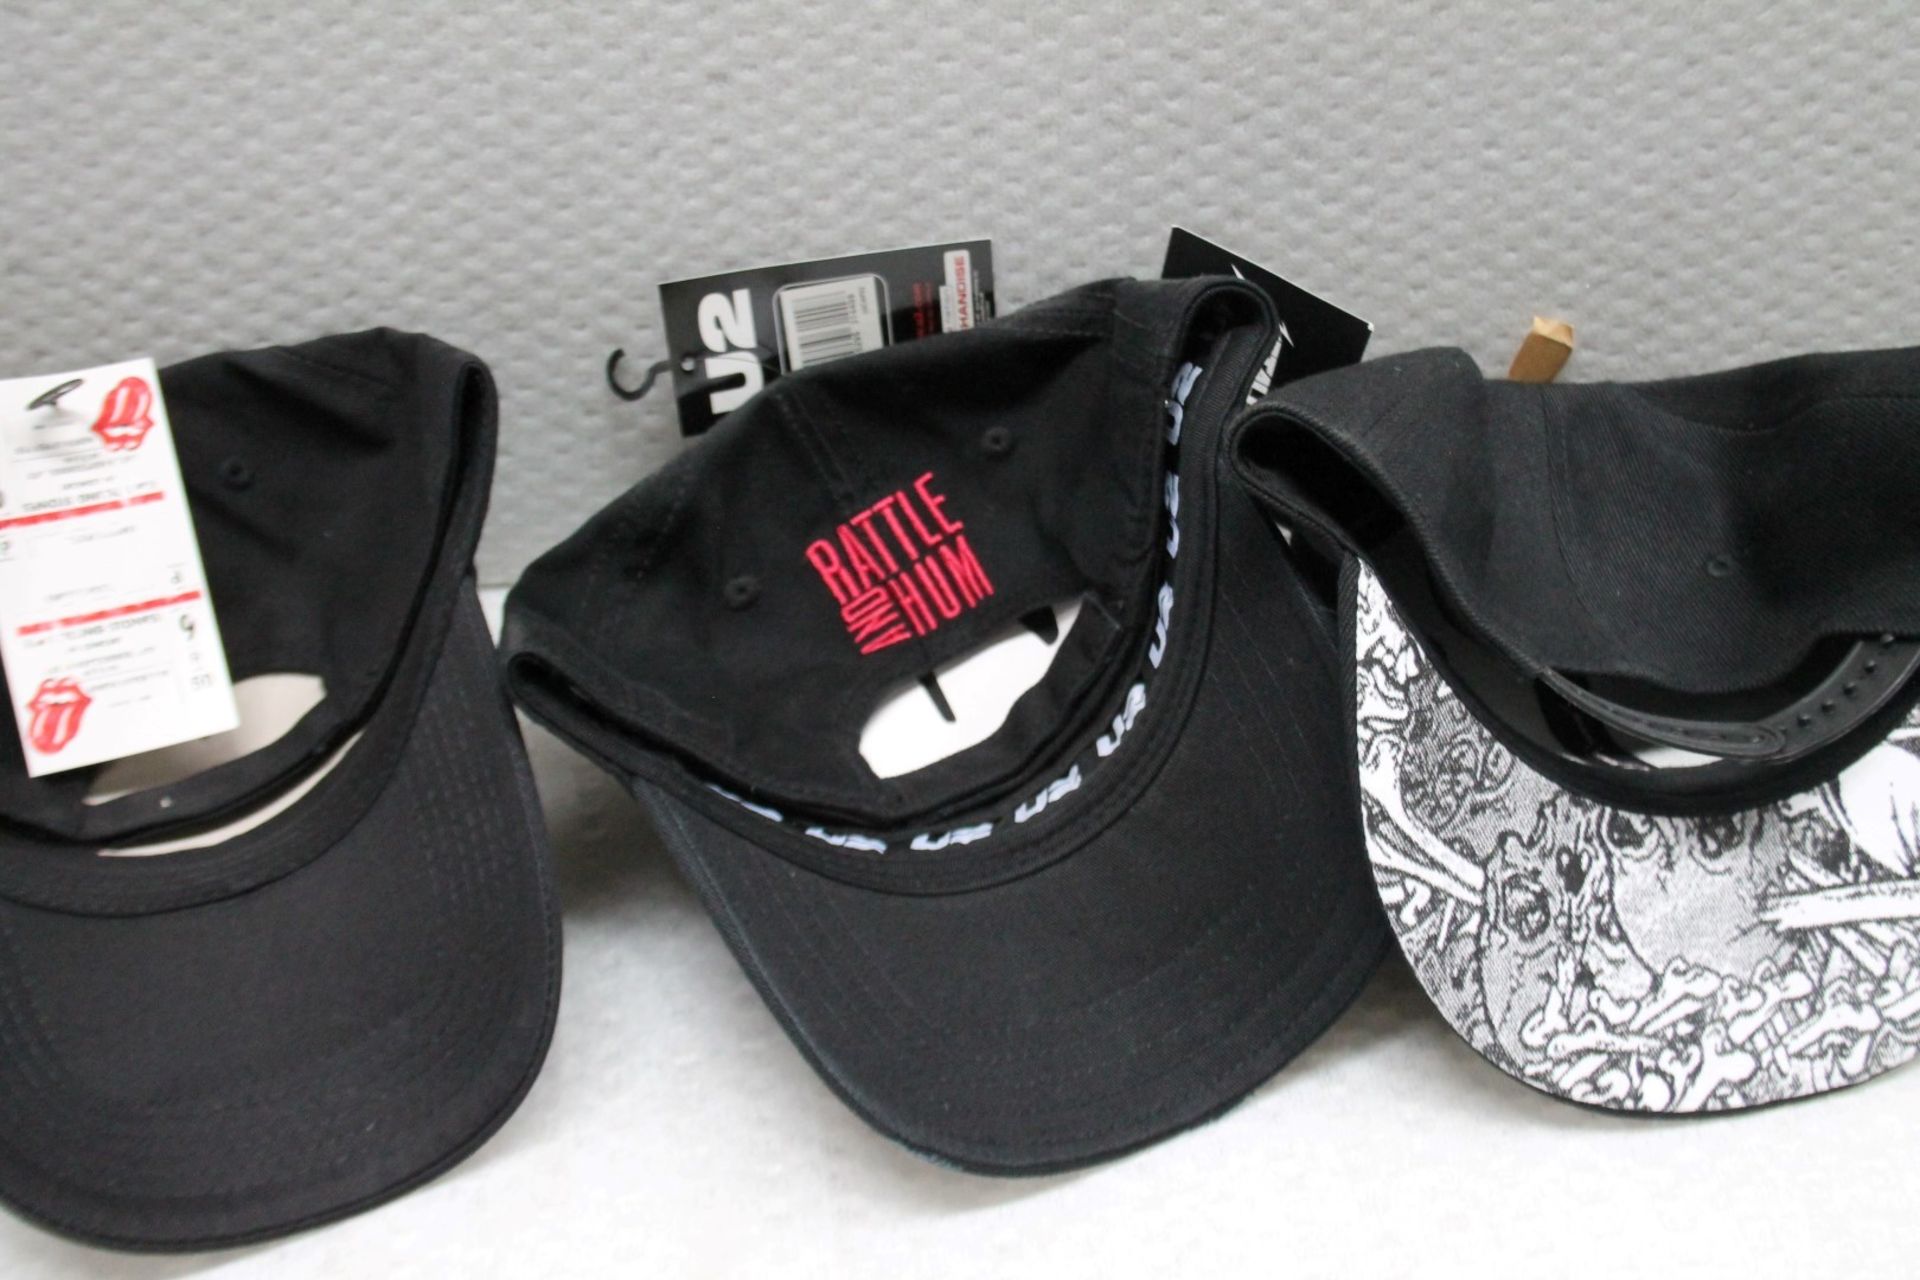 5 x Assorted Baseball Cap Featuring Kiss, Rolling Stones, U2, Metallica and Ozzy Osbourne - Colour: - Image 5 of 9